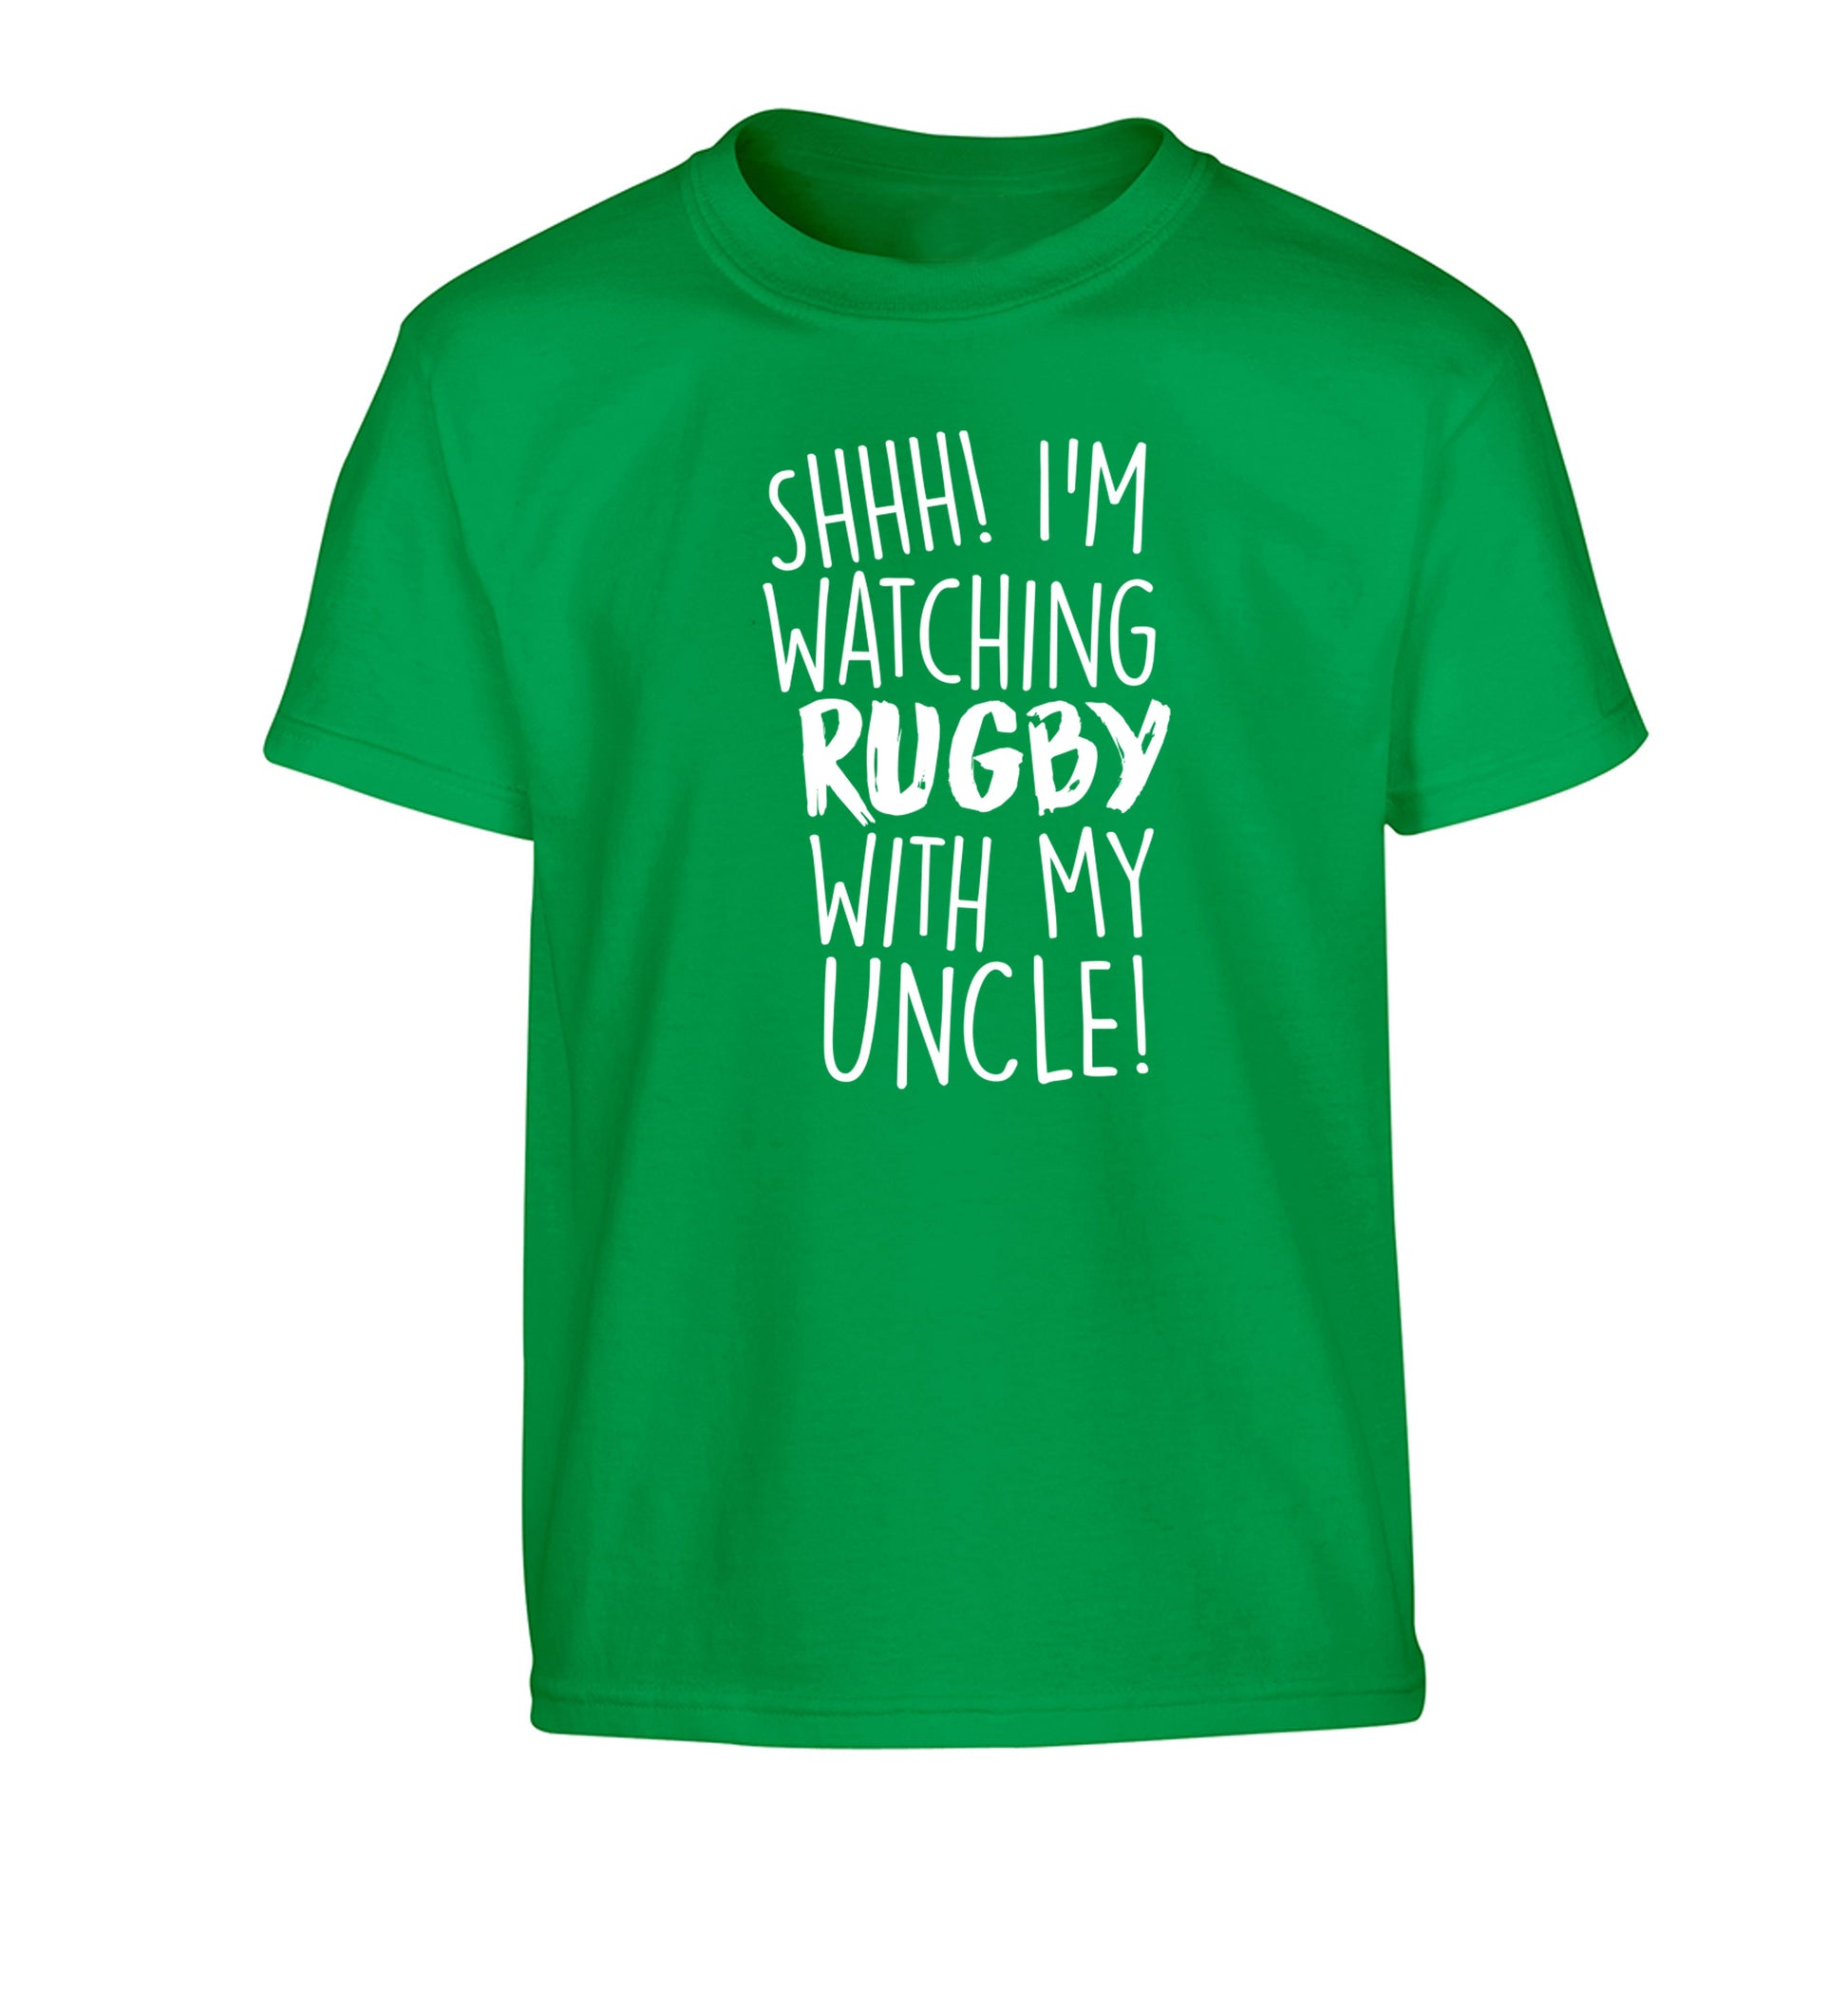 Shh.. I'm watching rugby with my uncle Children's green Tshirt 12-13 Years